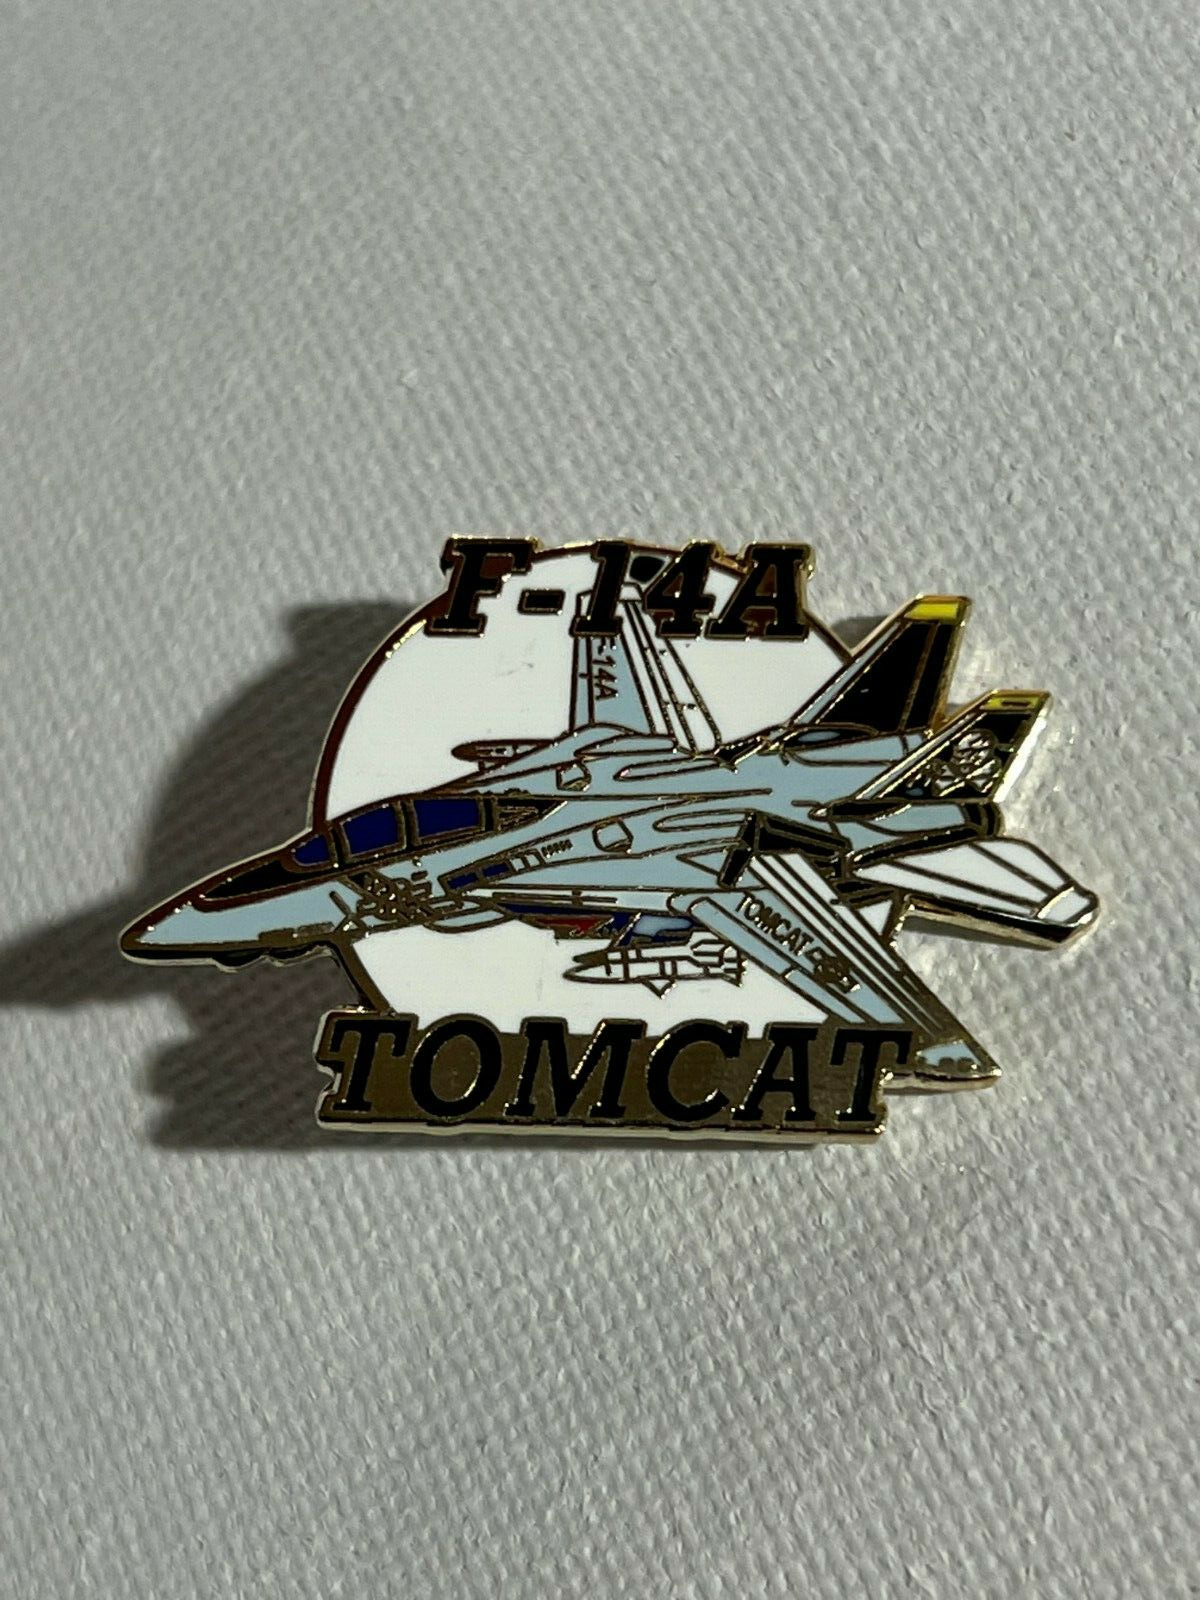 US NAVY F-14A TOMCAT AIRCRAFT MILITARY HAT PIN MEASURES 1 1/2 INCHES